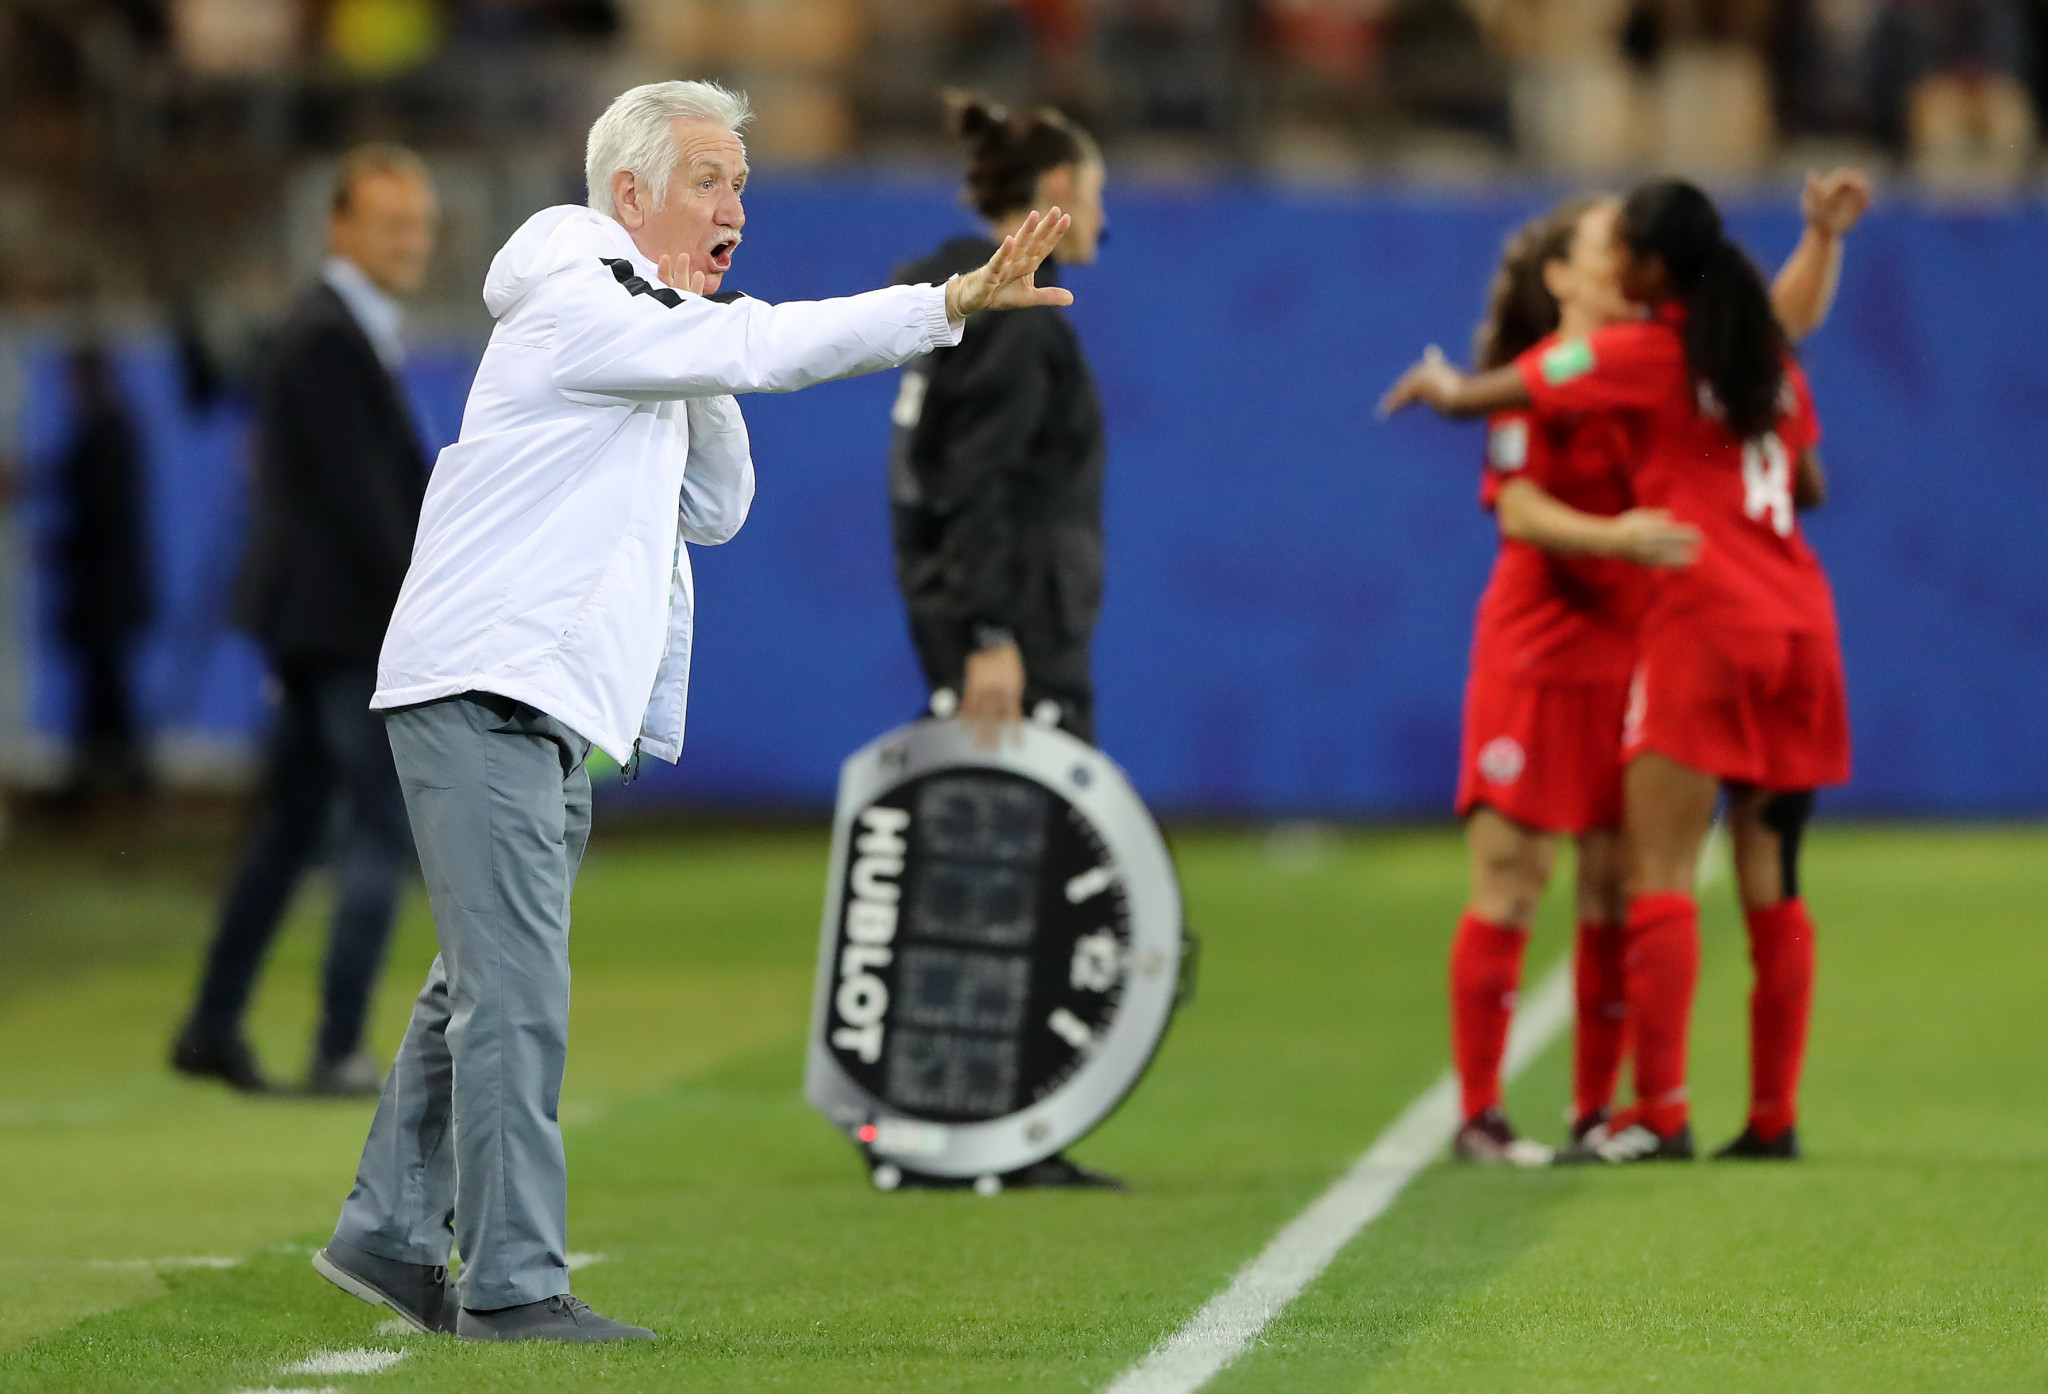 Tom Sermanni was head coach of New Zealand for the 2019 FIFA Women's World Cup in France ©Getty Images